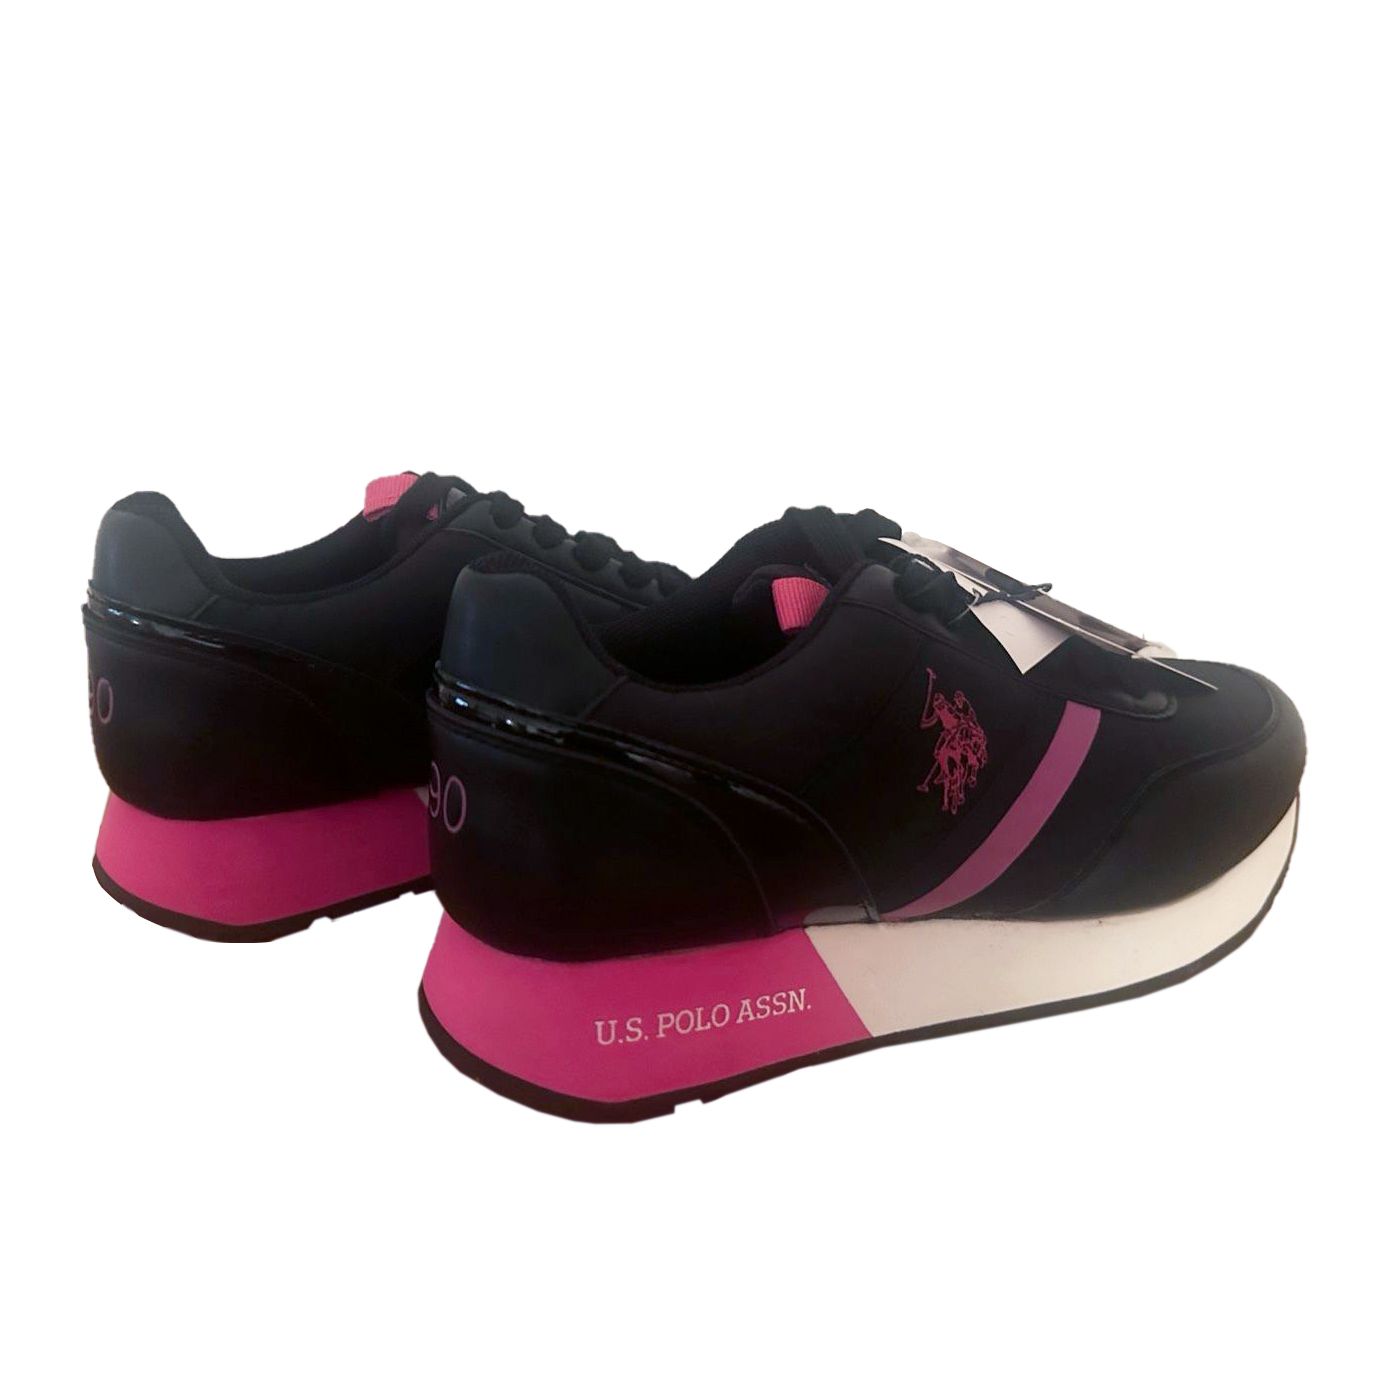 U.S. POLO ASSN. Chic Black Sneakers with Vibrant Fuchsia Accents